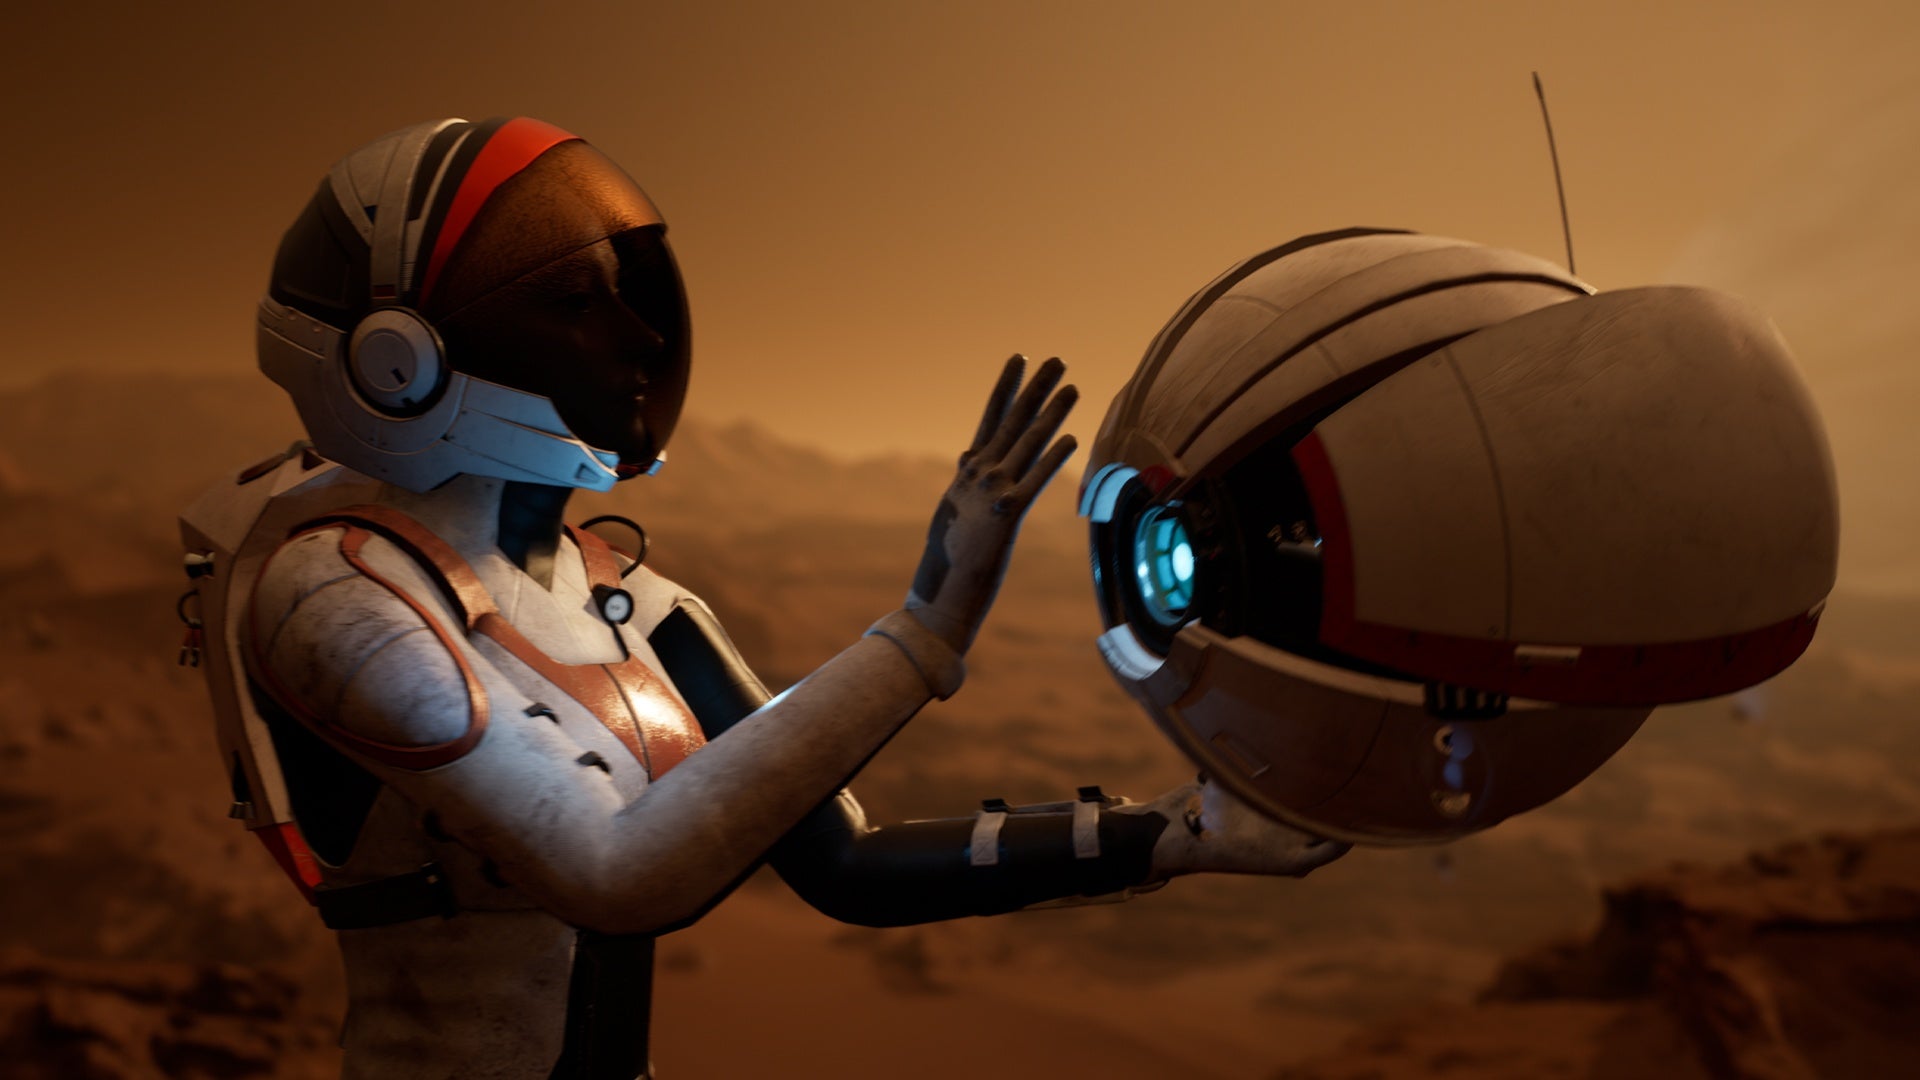 An image from Deliver Us Mars, showing a space helmeted lady holding, patting, catching a floating robot that looks a bit like a Portal personality core.